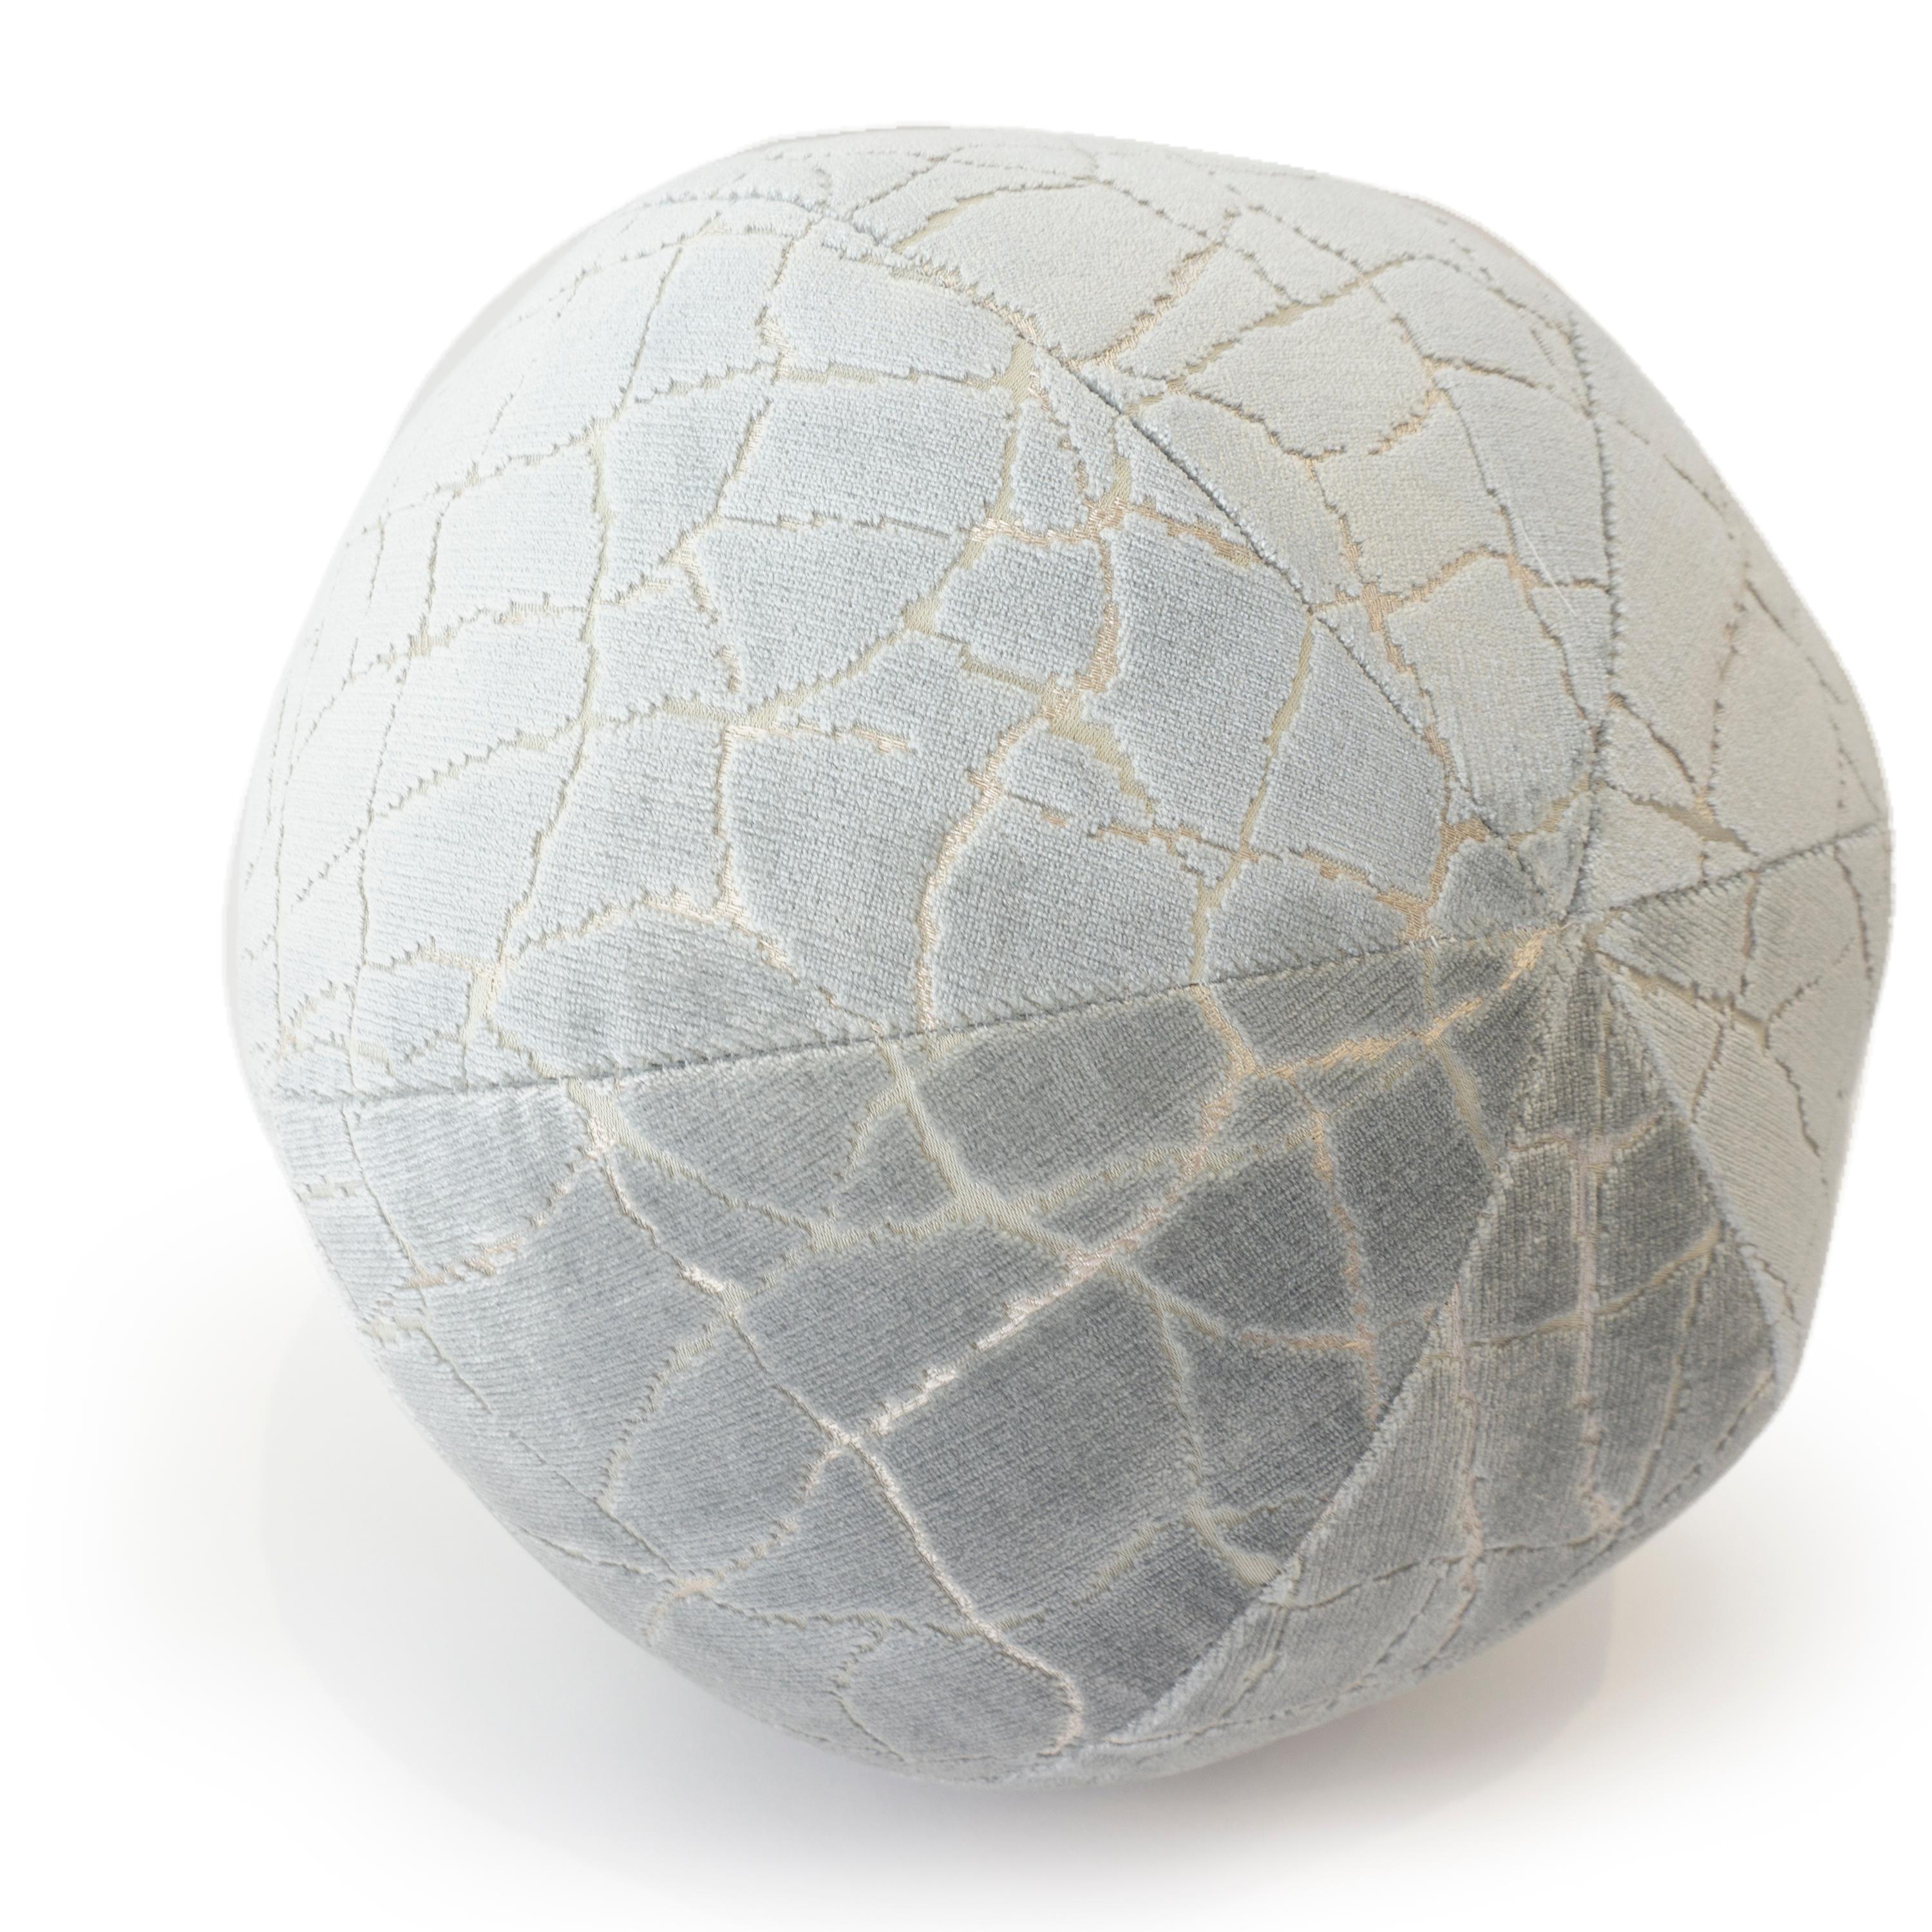 A hand sewn round ball pillow made with soft cut velvet fabric featuring a 